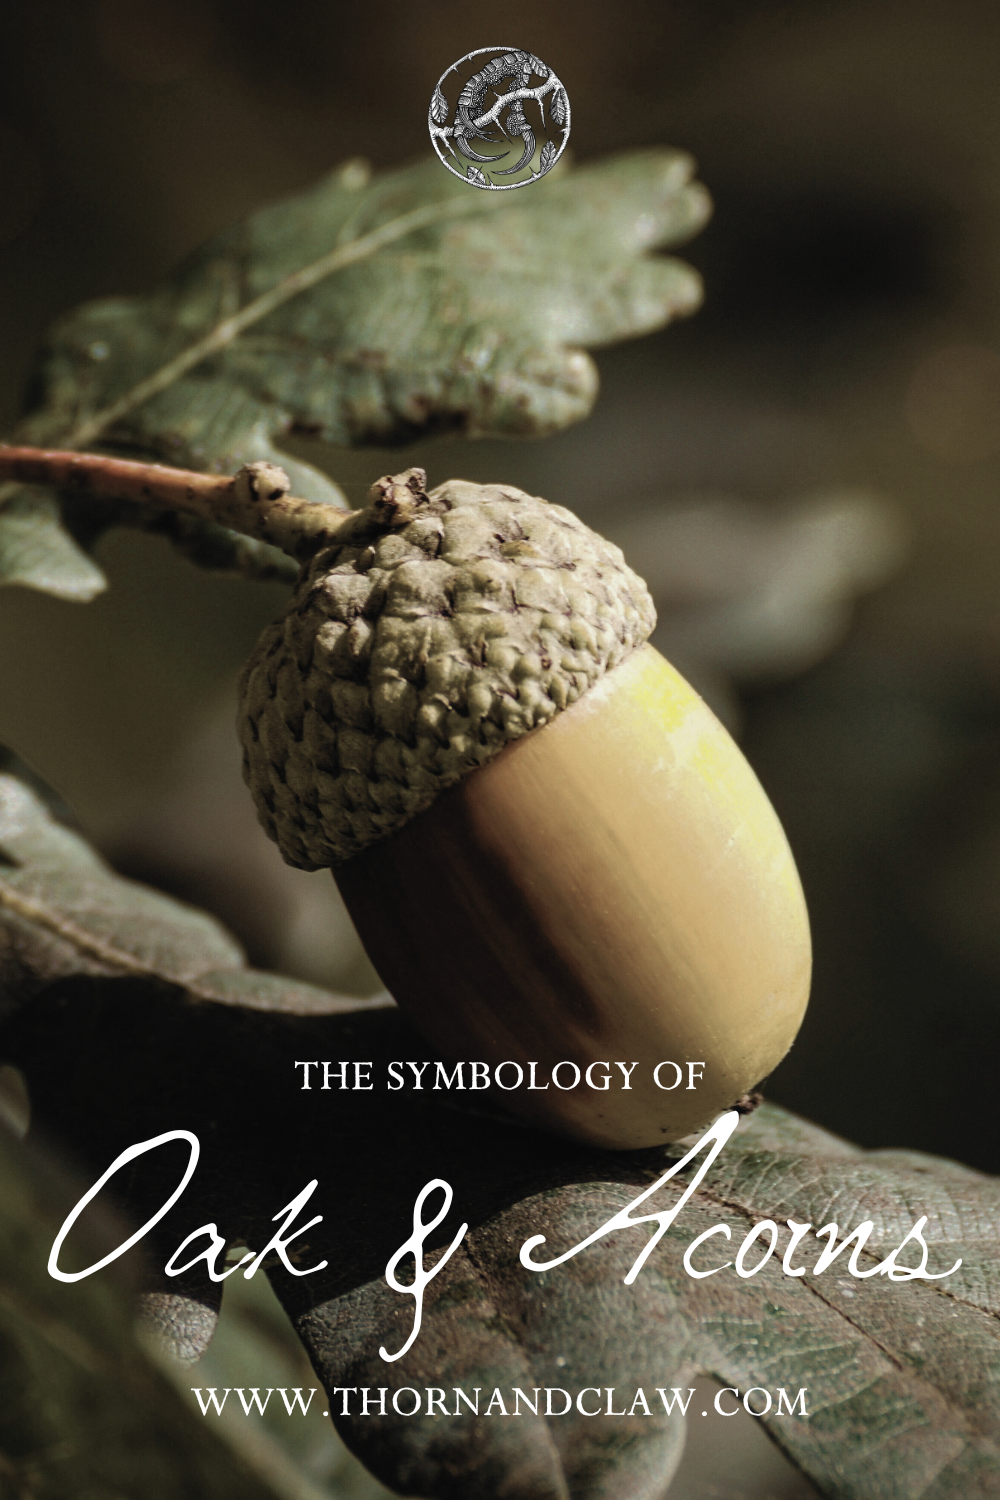 The symbology of oak trees and acorns